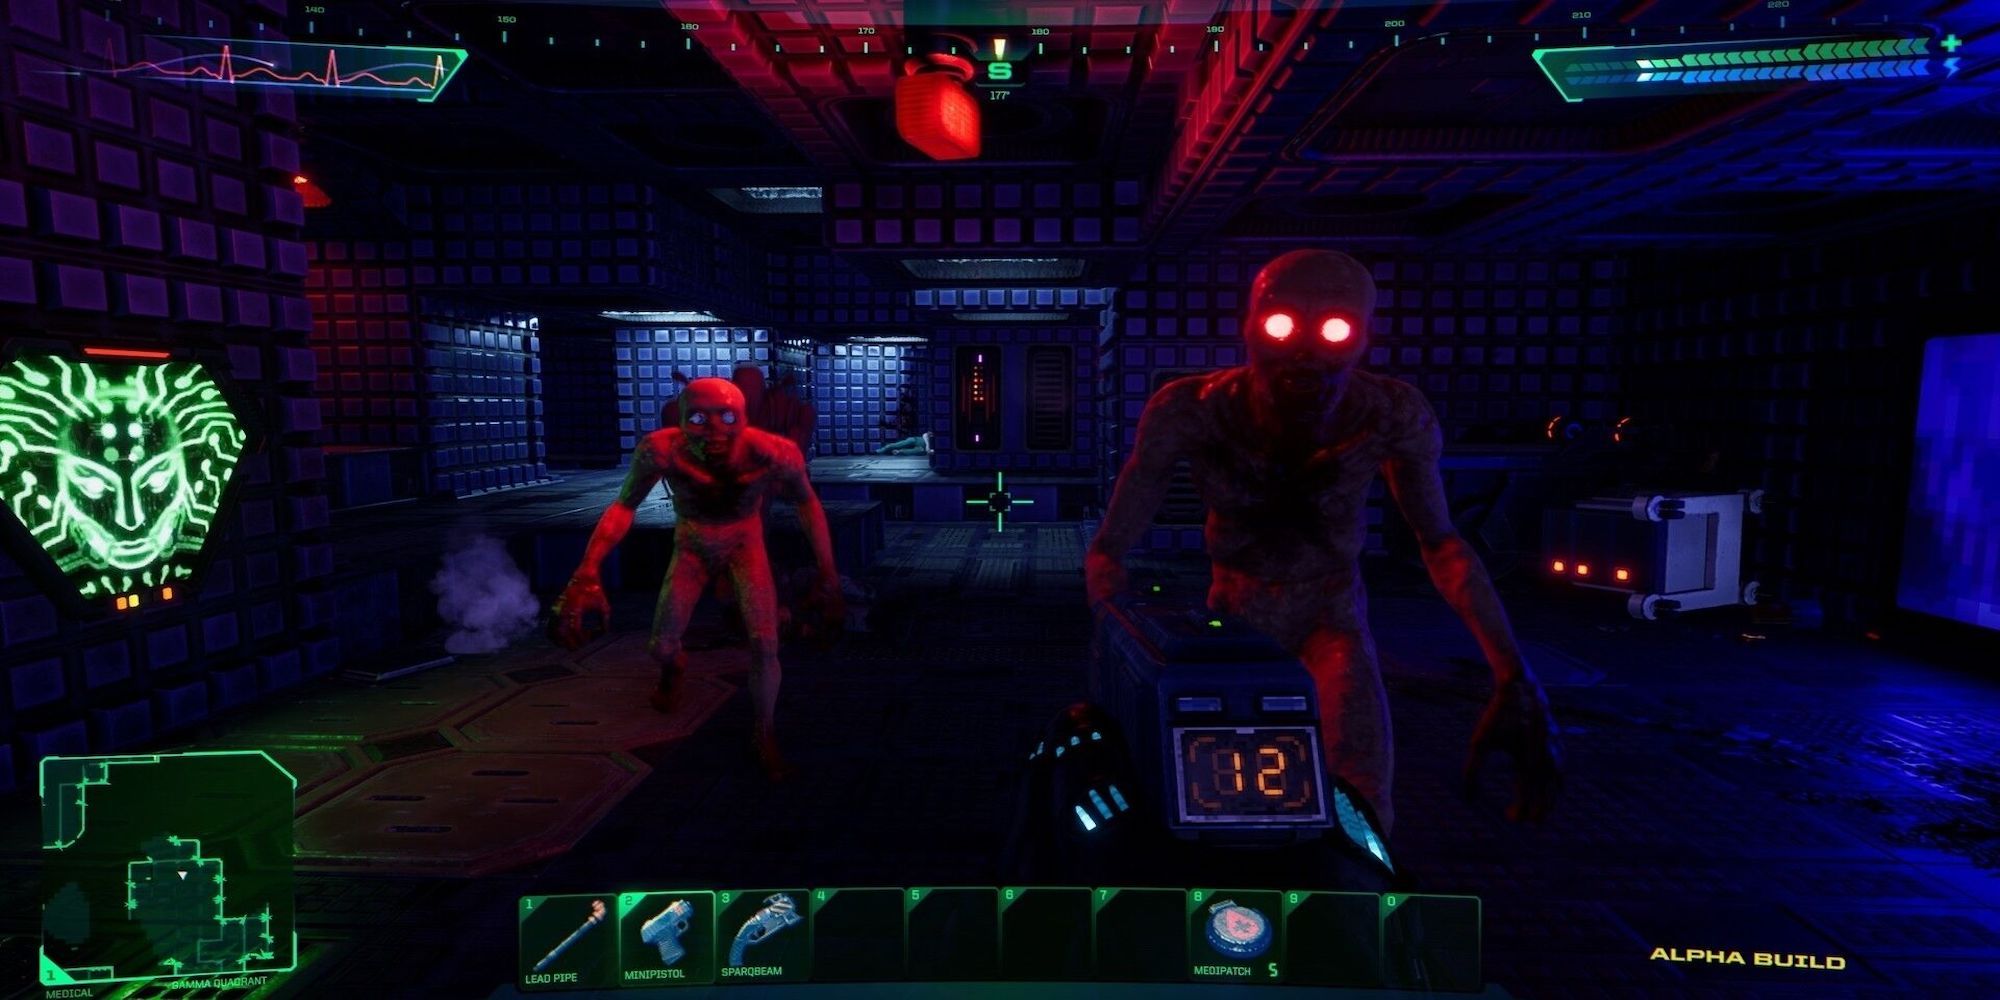 Fighting enemies in the System Shock Remake